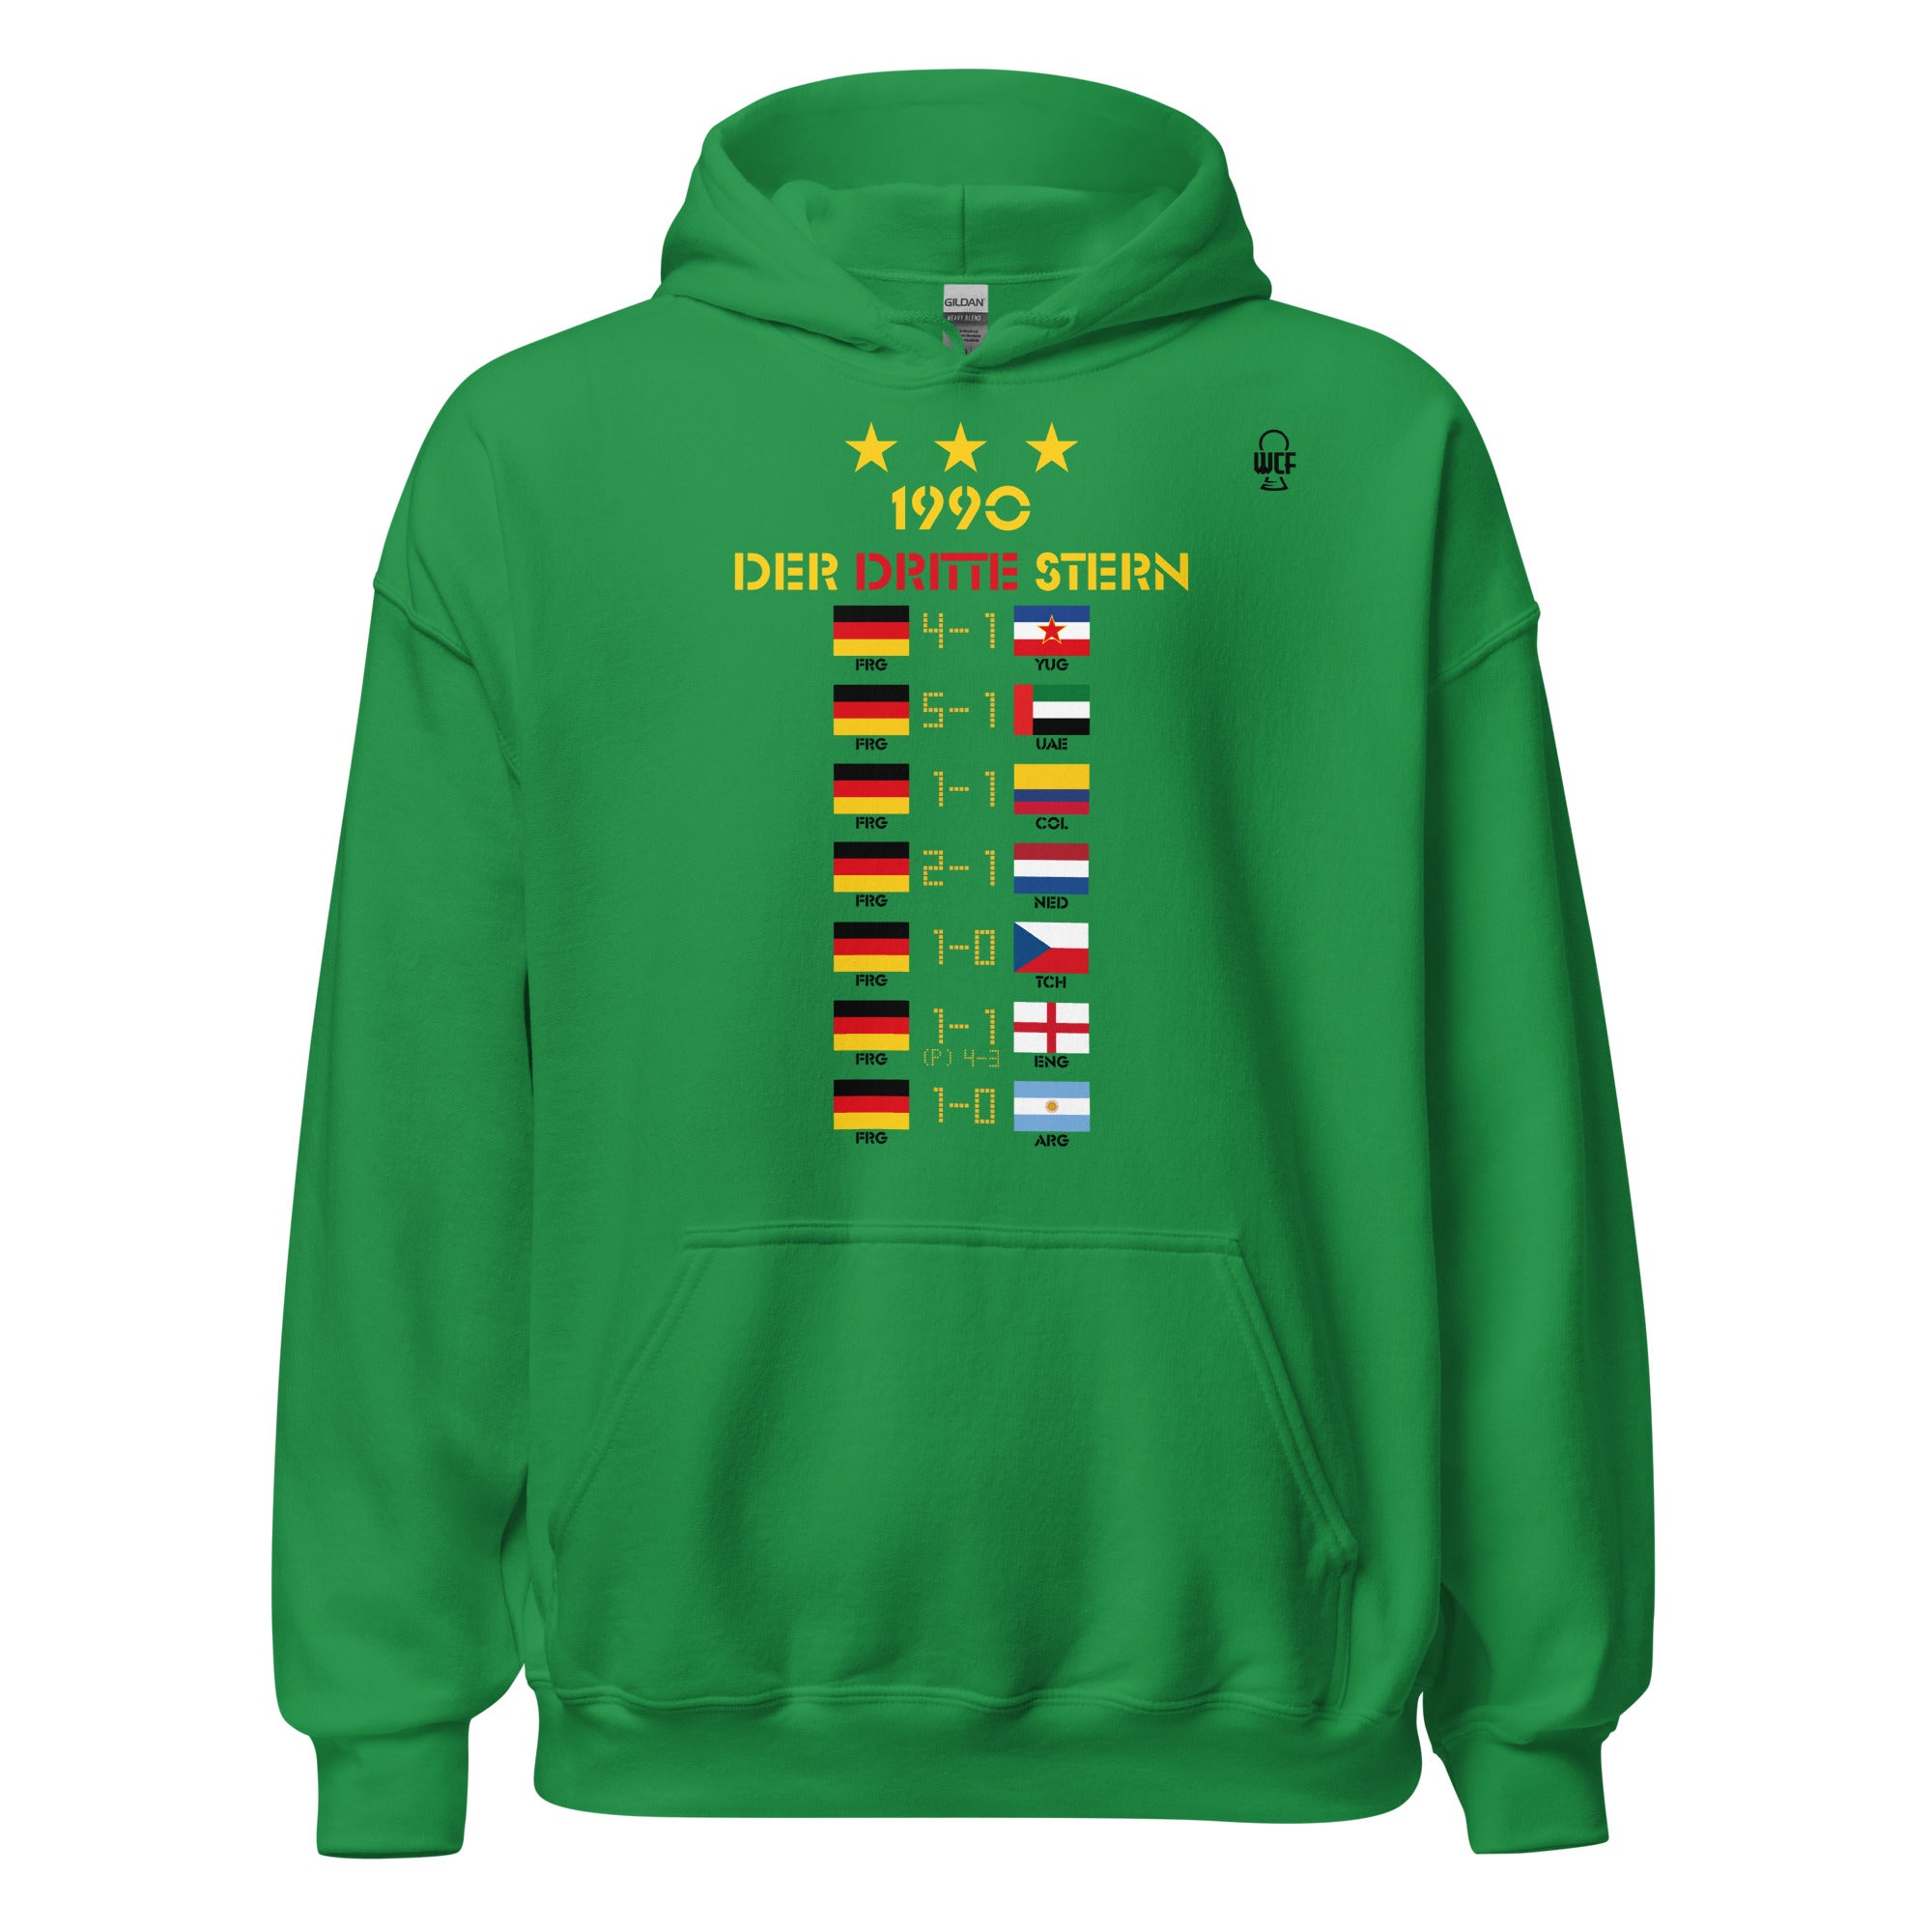 World Cup 1990 Hoodie - Road to the Glory - WEST GERMANY